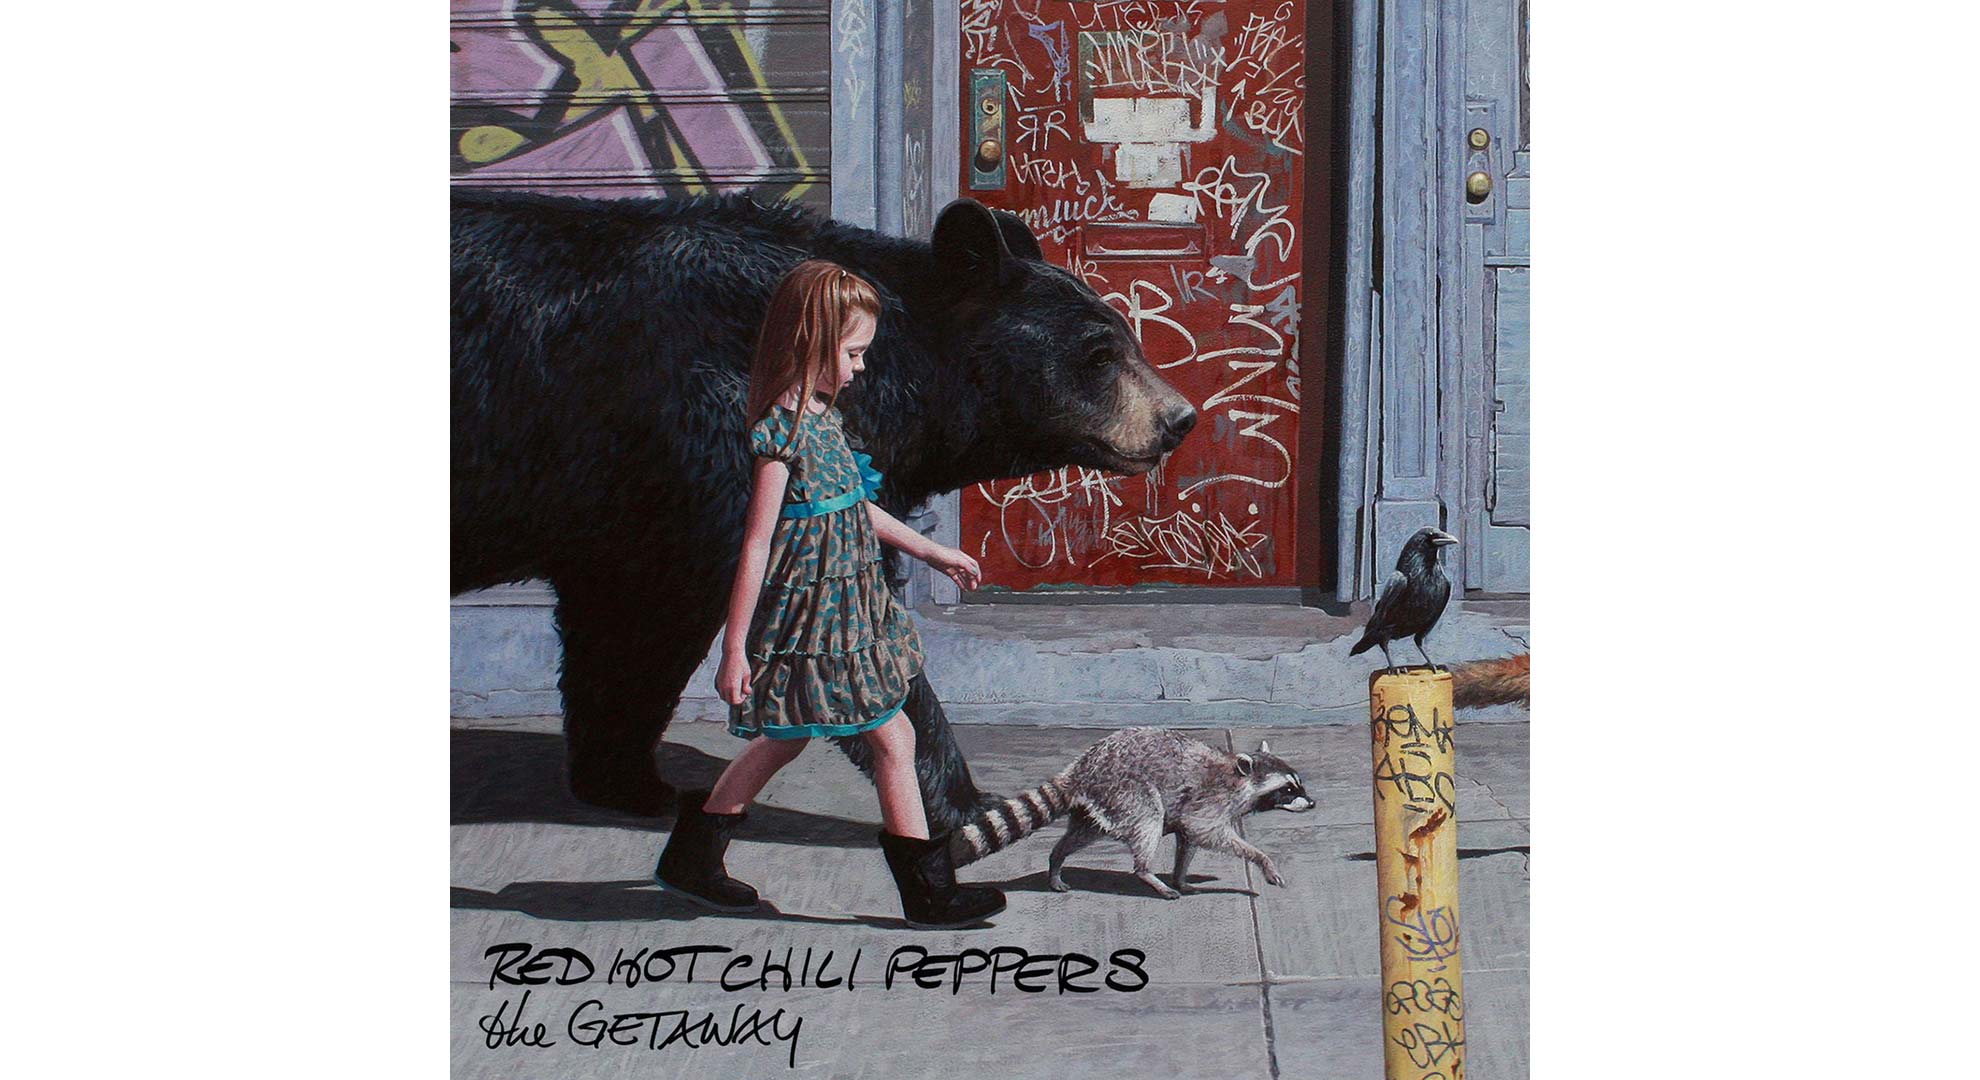 Red hot chili peppers dark. The Getaway Red hot Chili Peppers. RHCP the Getaway. Кевин Петерсон художник. The Getaway Red hot Chili Peppers обложка.